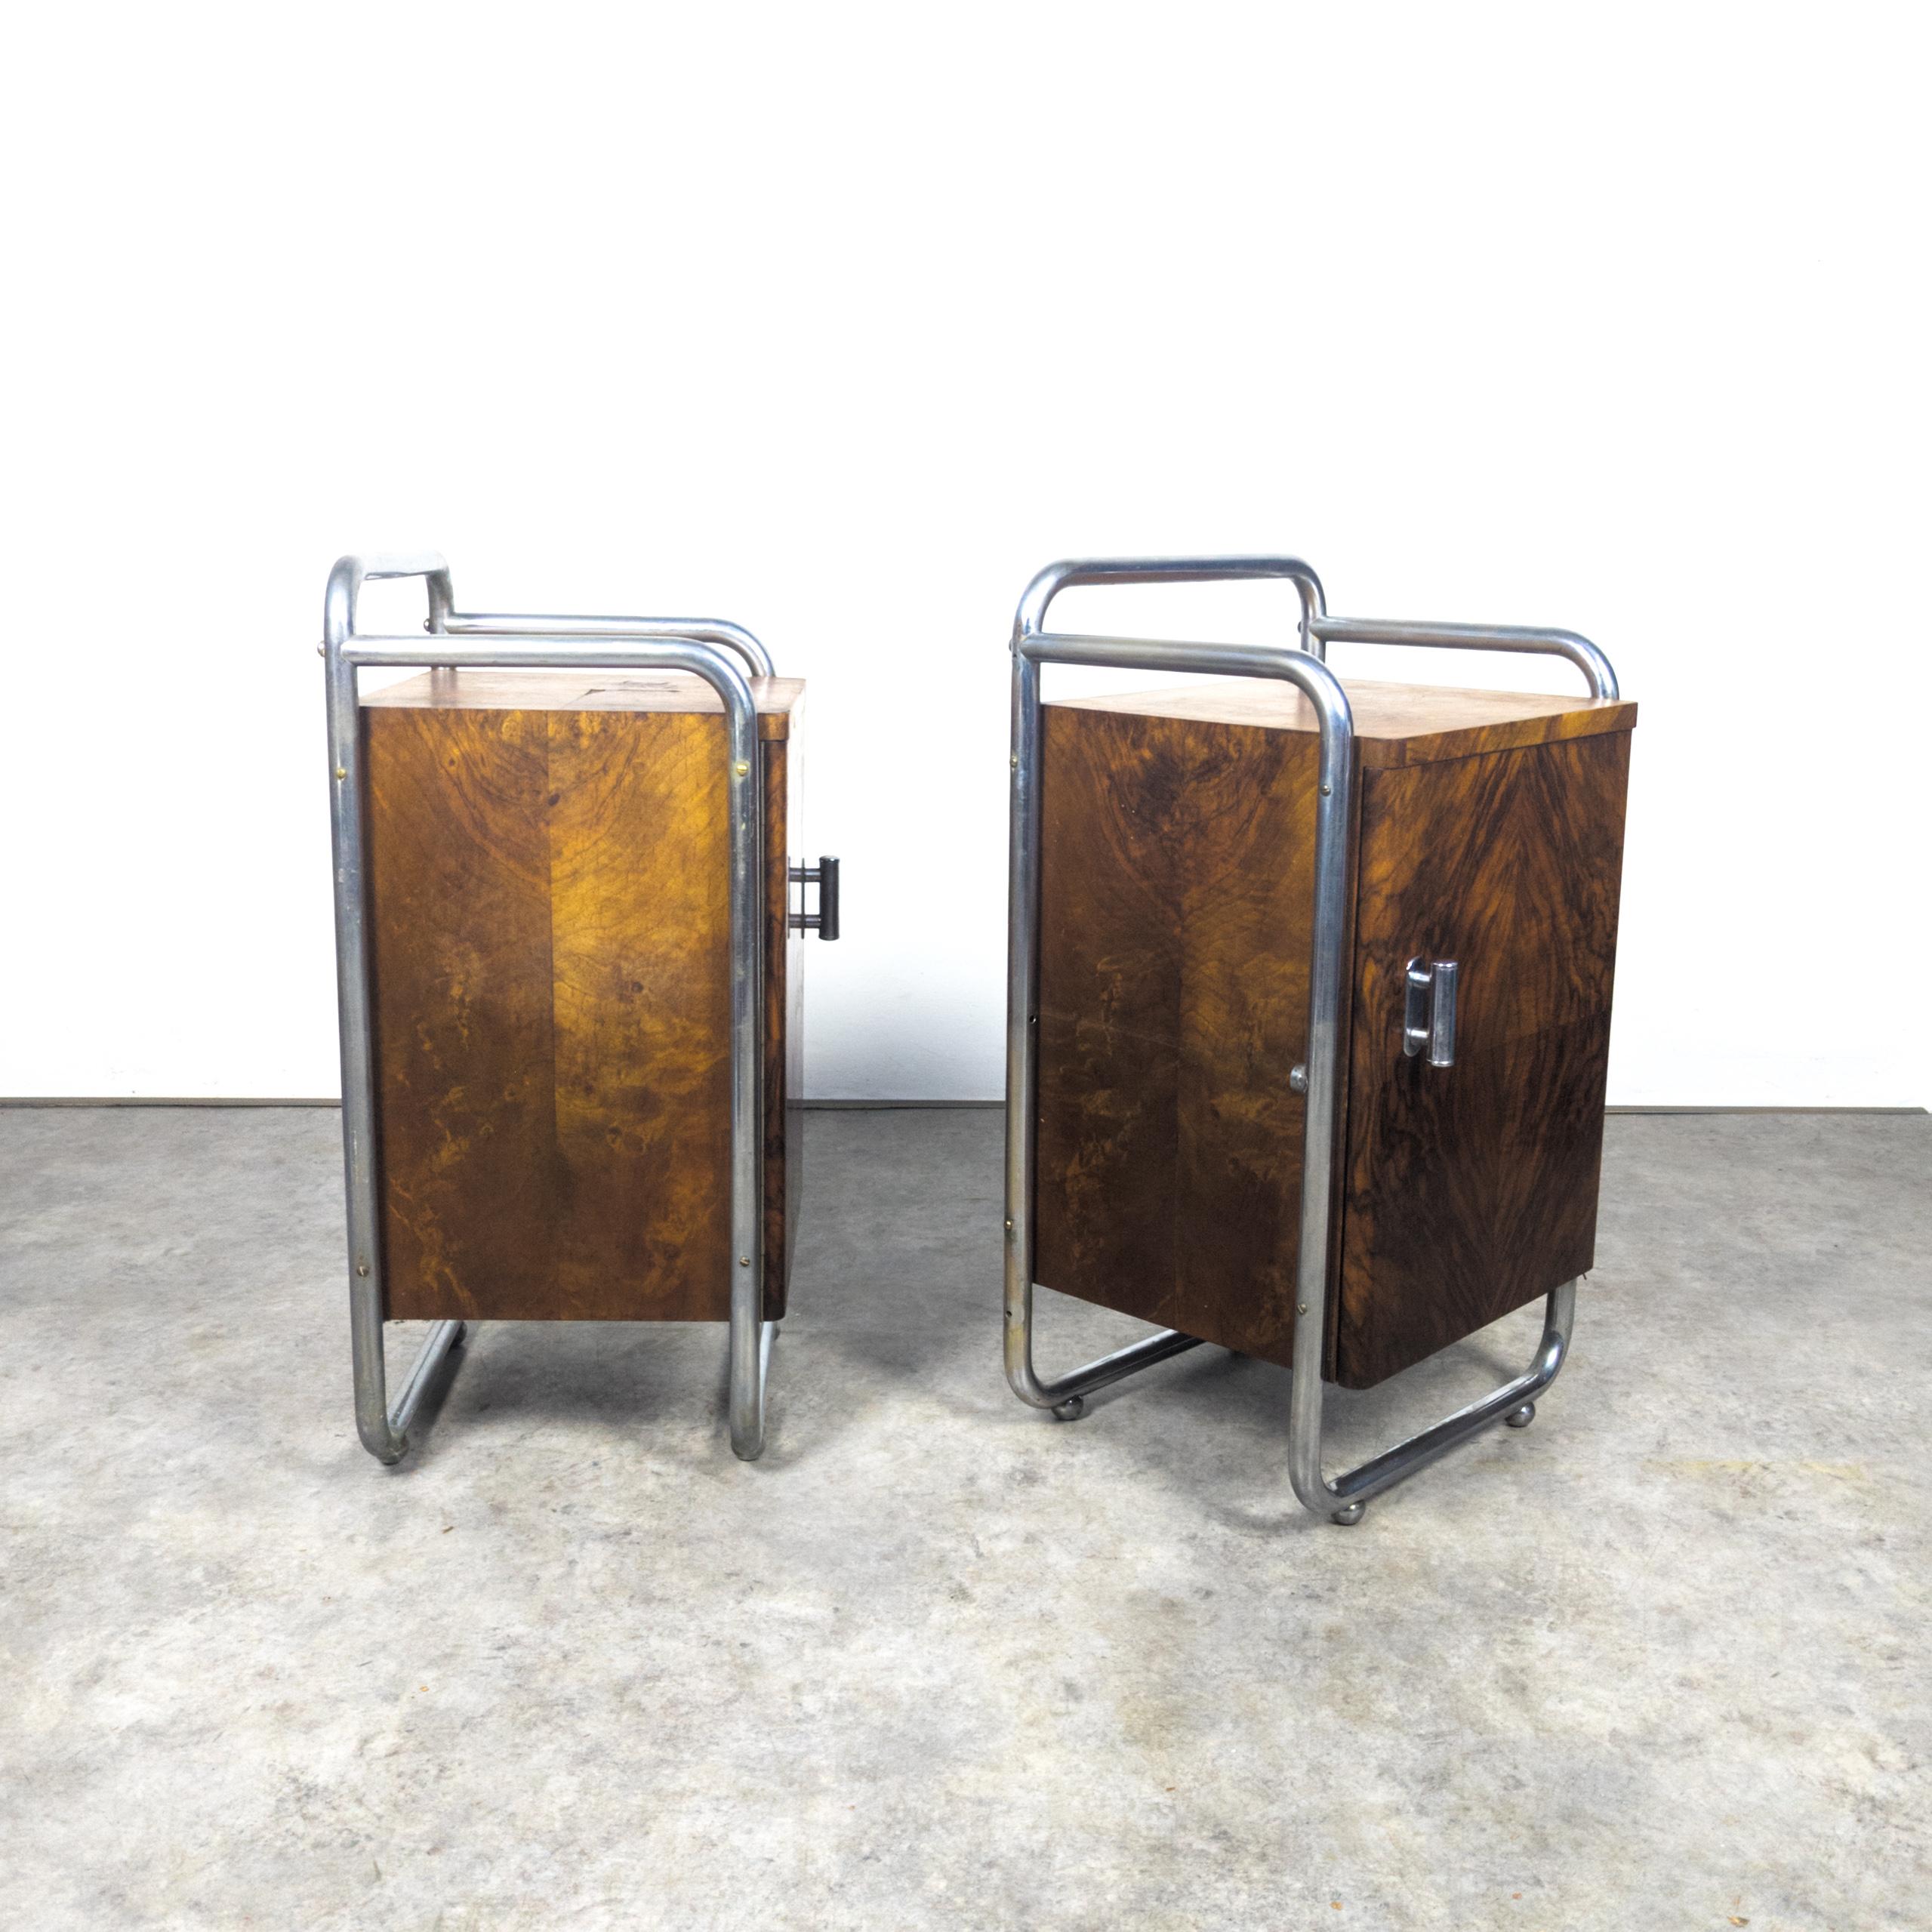 Manufactured by Gottwald company, former Czechoslovakia in the 1930s. Luxurious Art Deco night stands in chrome plated tubular steel and walnut veneered beech wood. In original condition. Chrome in almost perfect condition, veneer with some traces